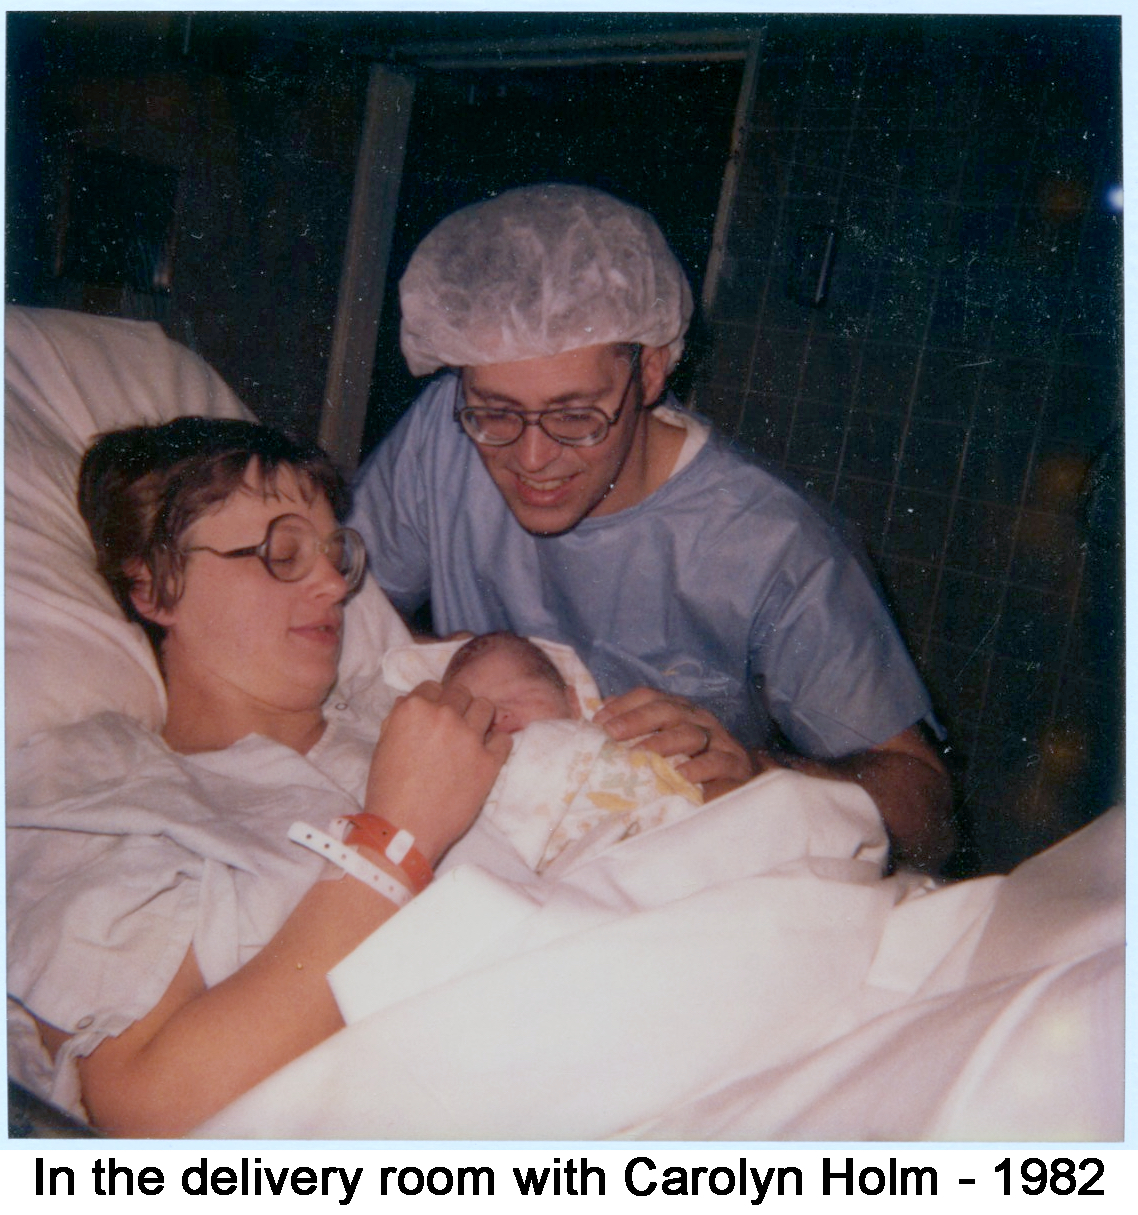 Gail and Albert Holm looking at the newborn Carolyn in Gail’s arms